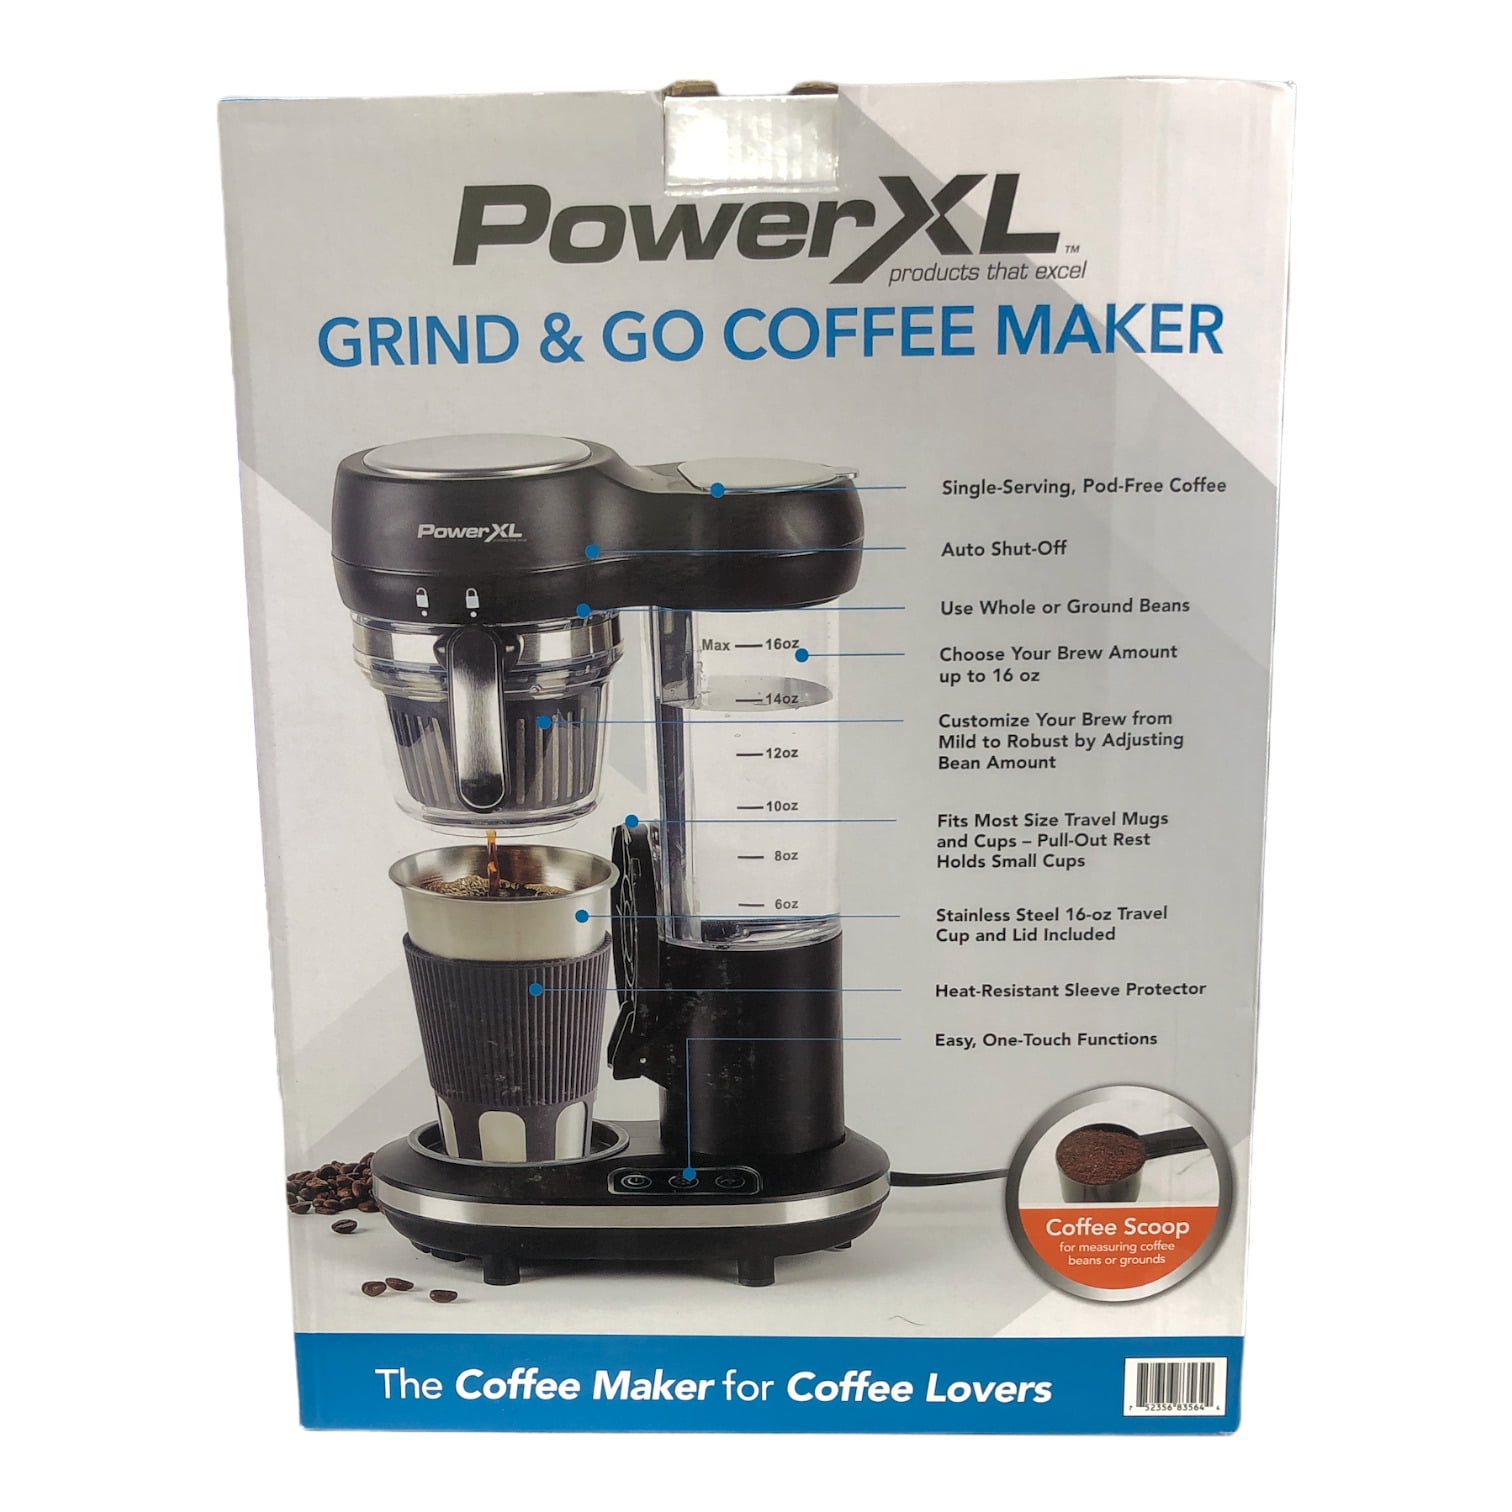 Built-in grinder, 16oz automatic single-serve coffee maker